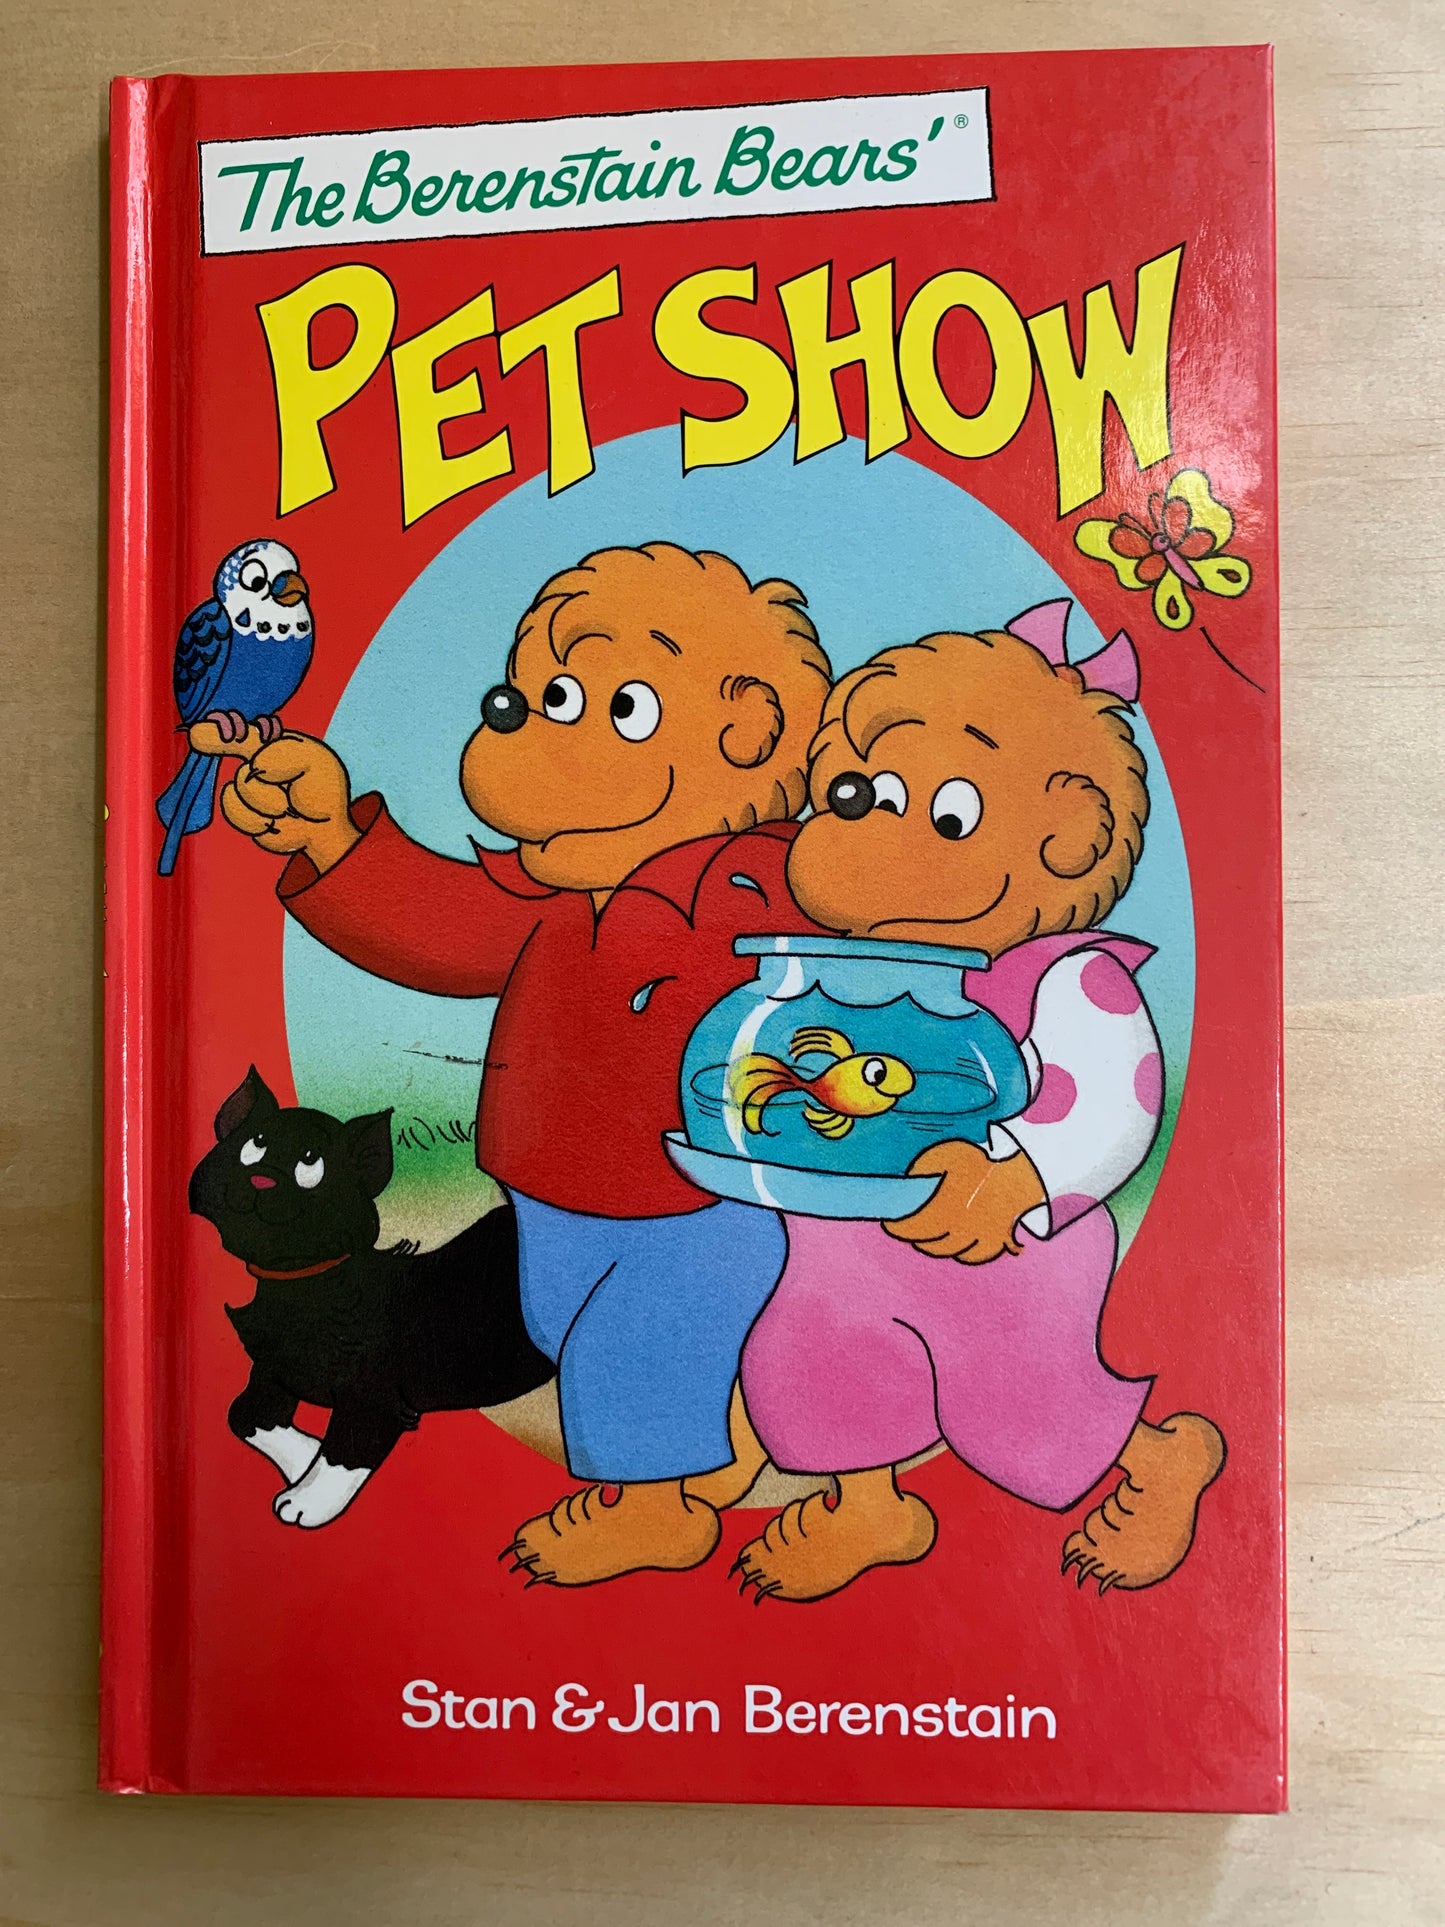 The Berenstain Bears’ Pet Show